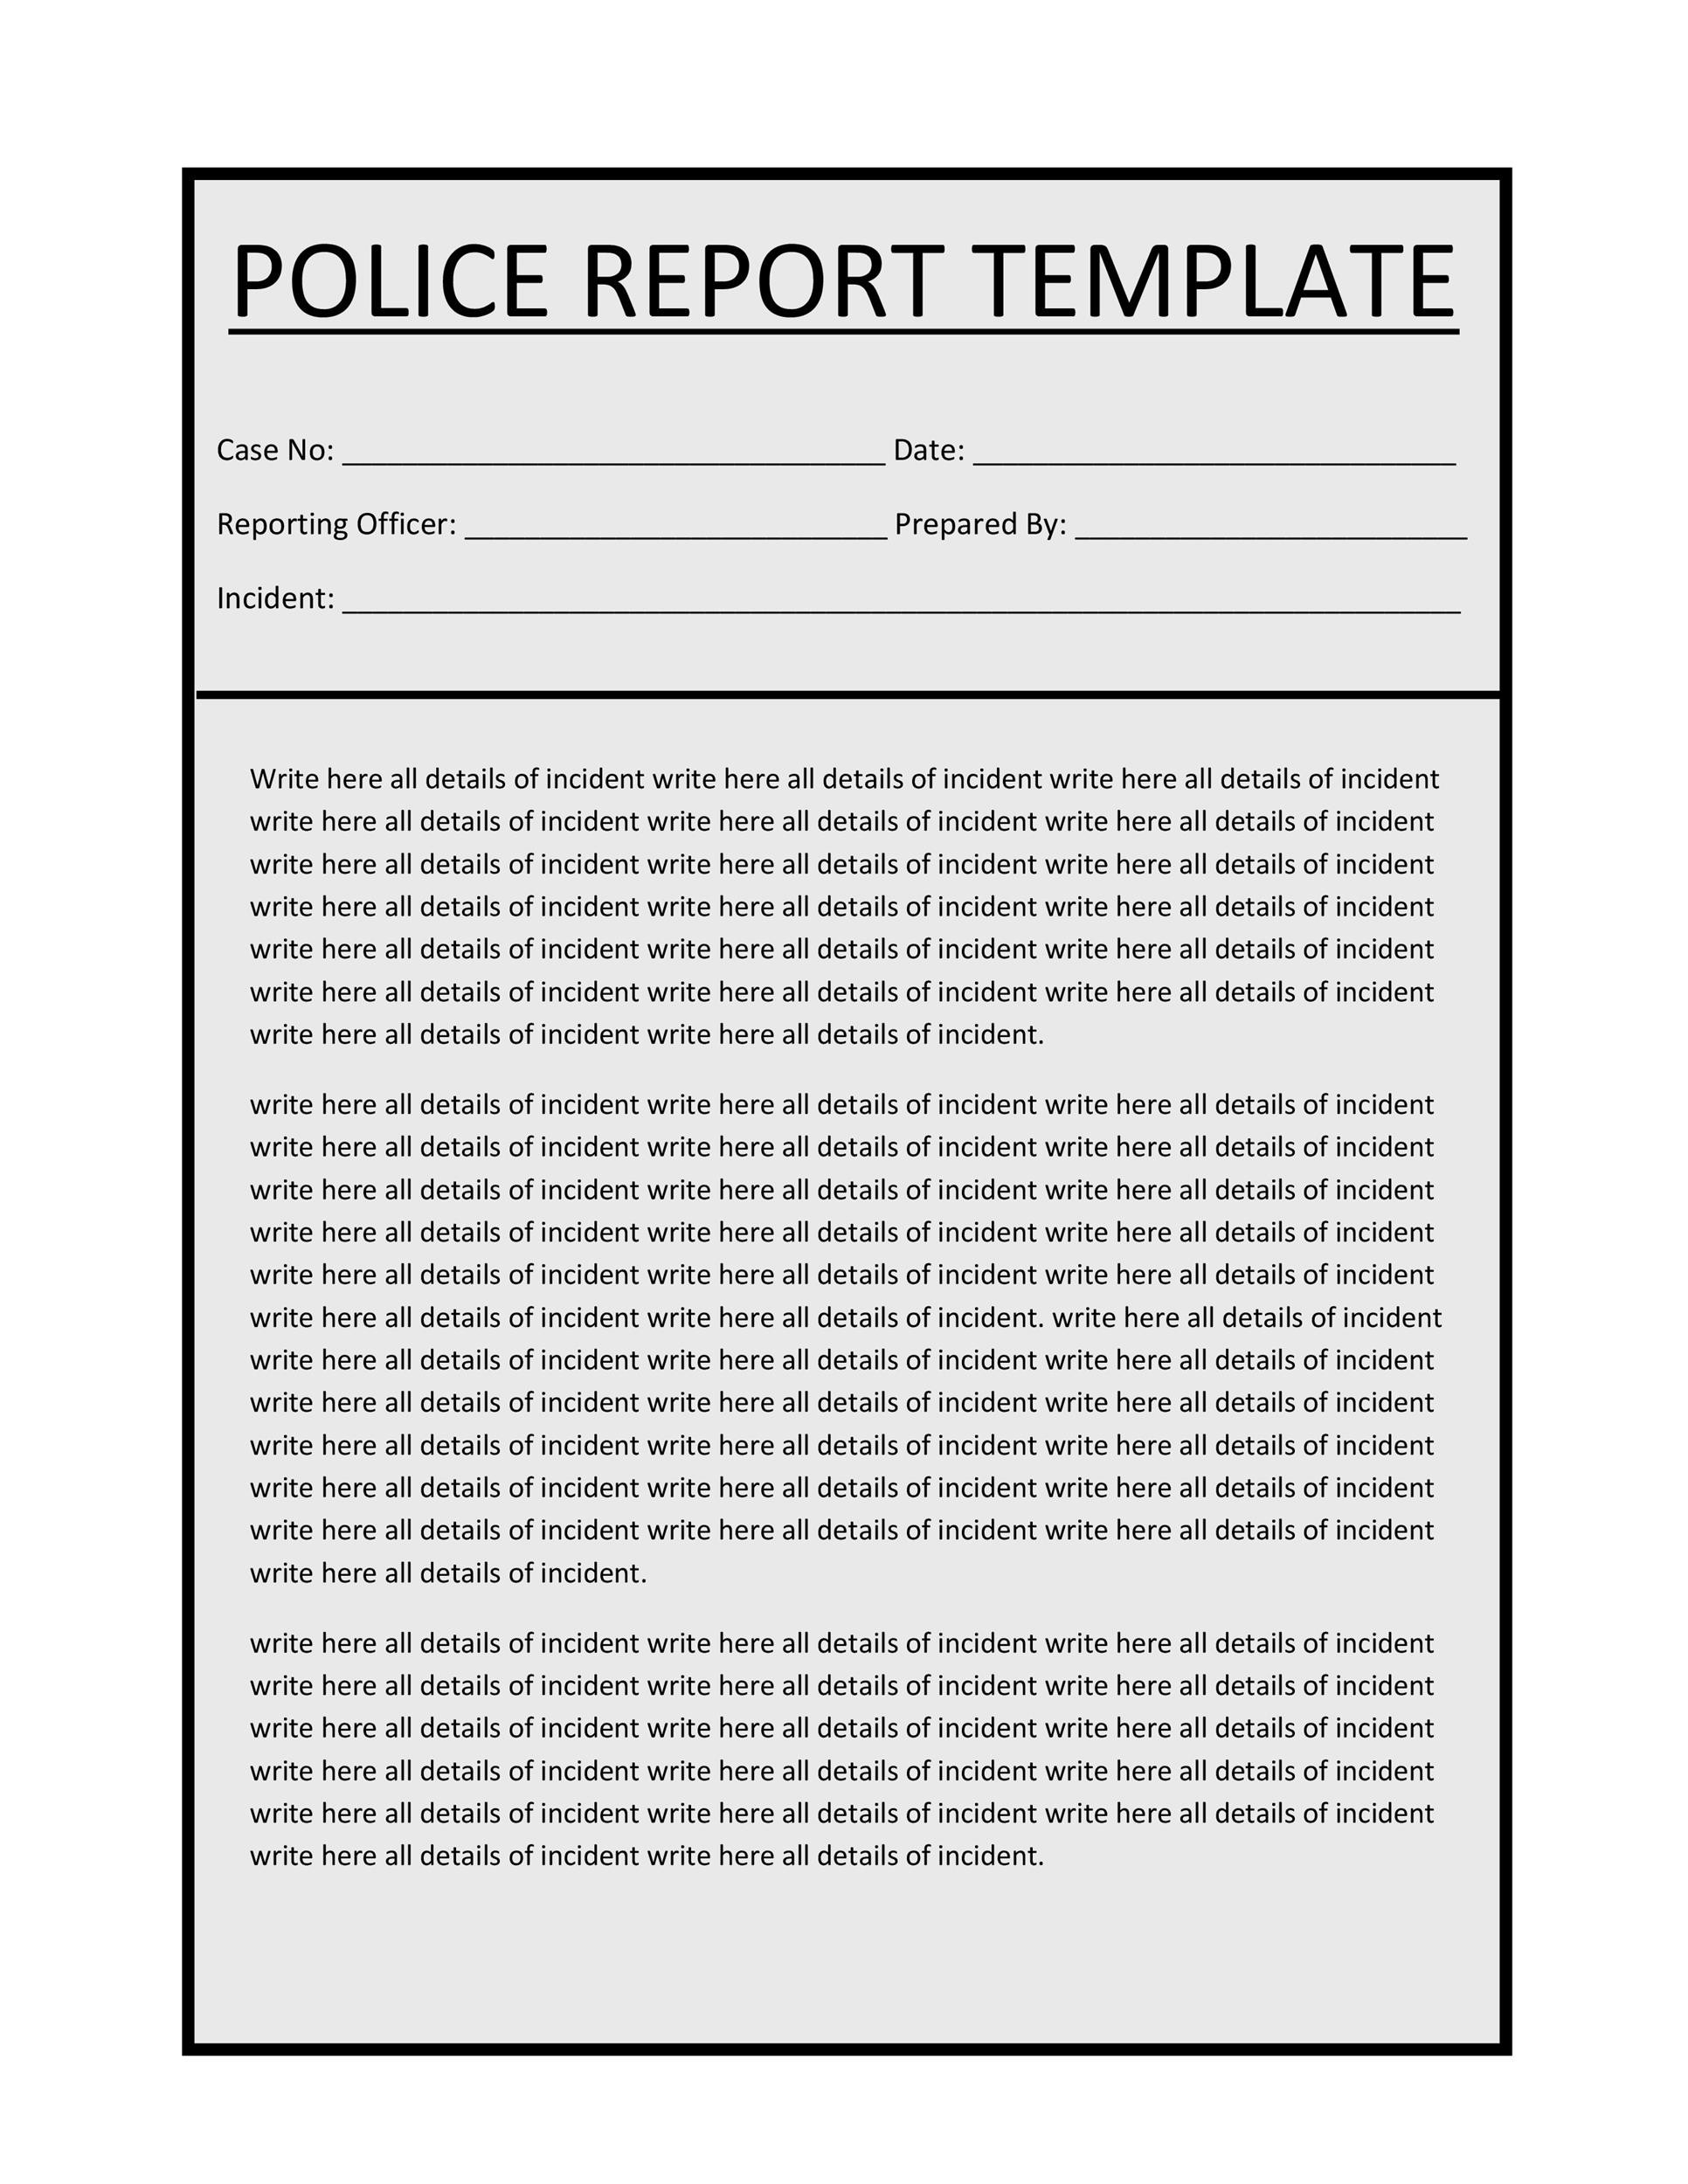 how to write a report to the police examples